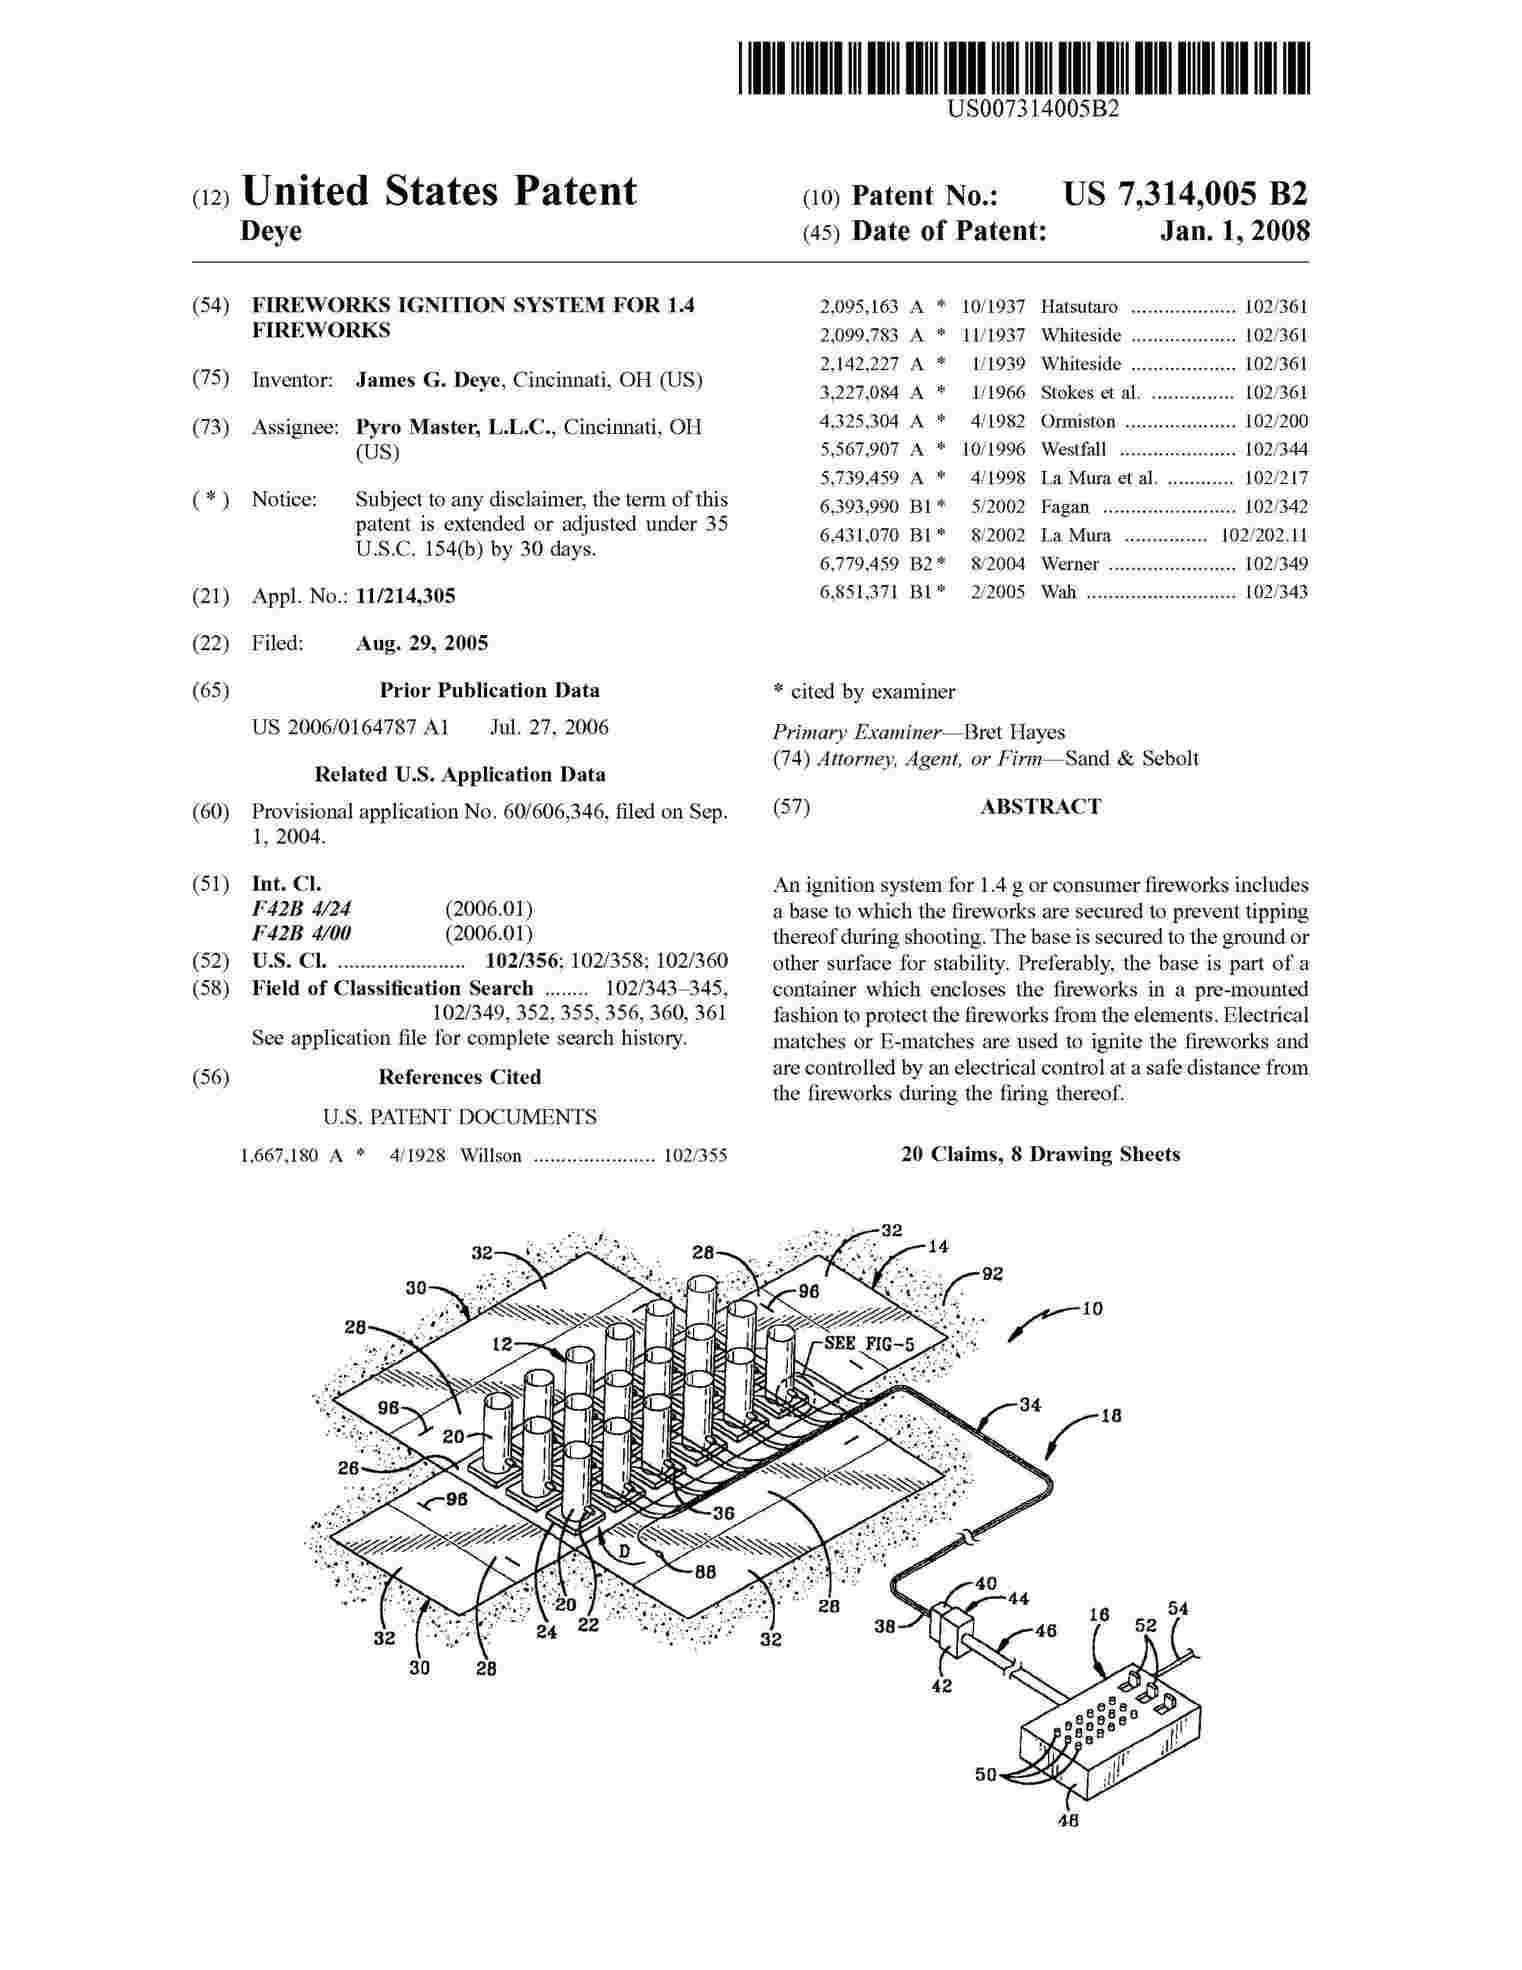 United States Patent Publication for Fireworks